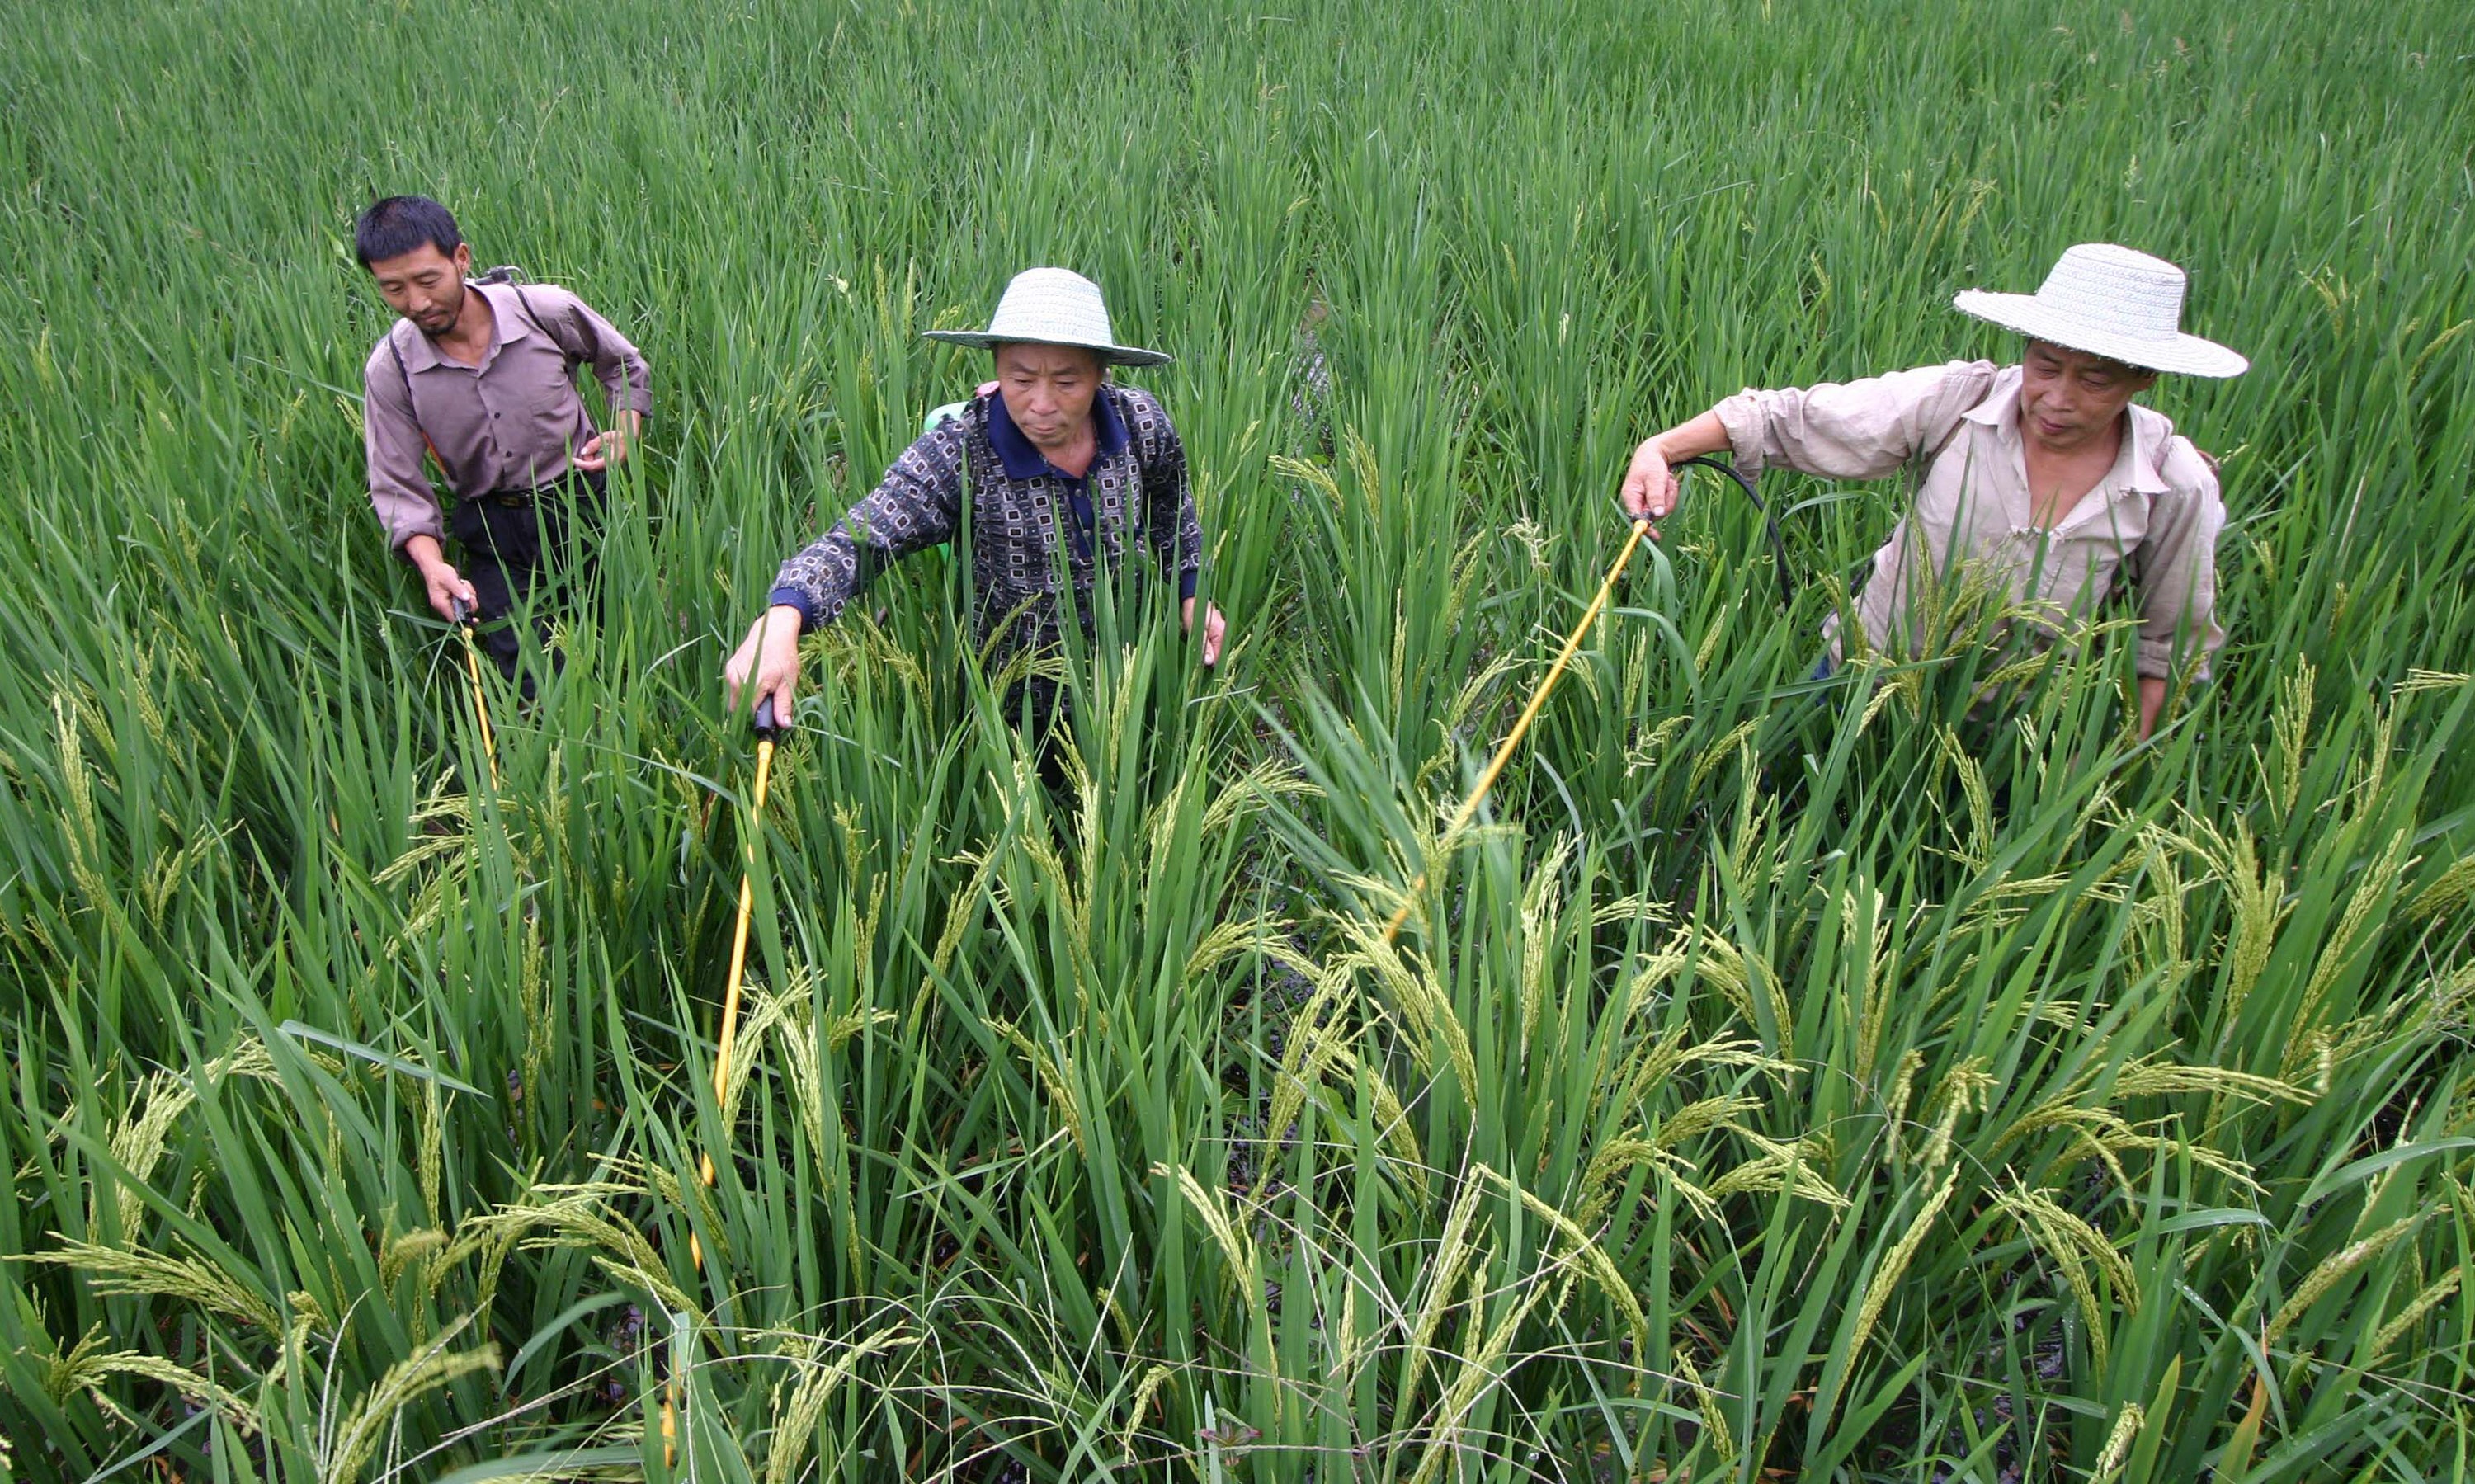 Farmers spray pesticide in a rice field in Yongchuan in southwest China's Chongqing municipality. Photo: AFP